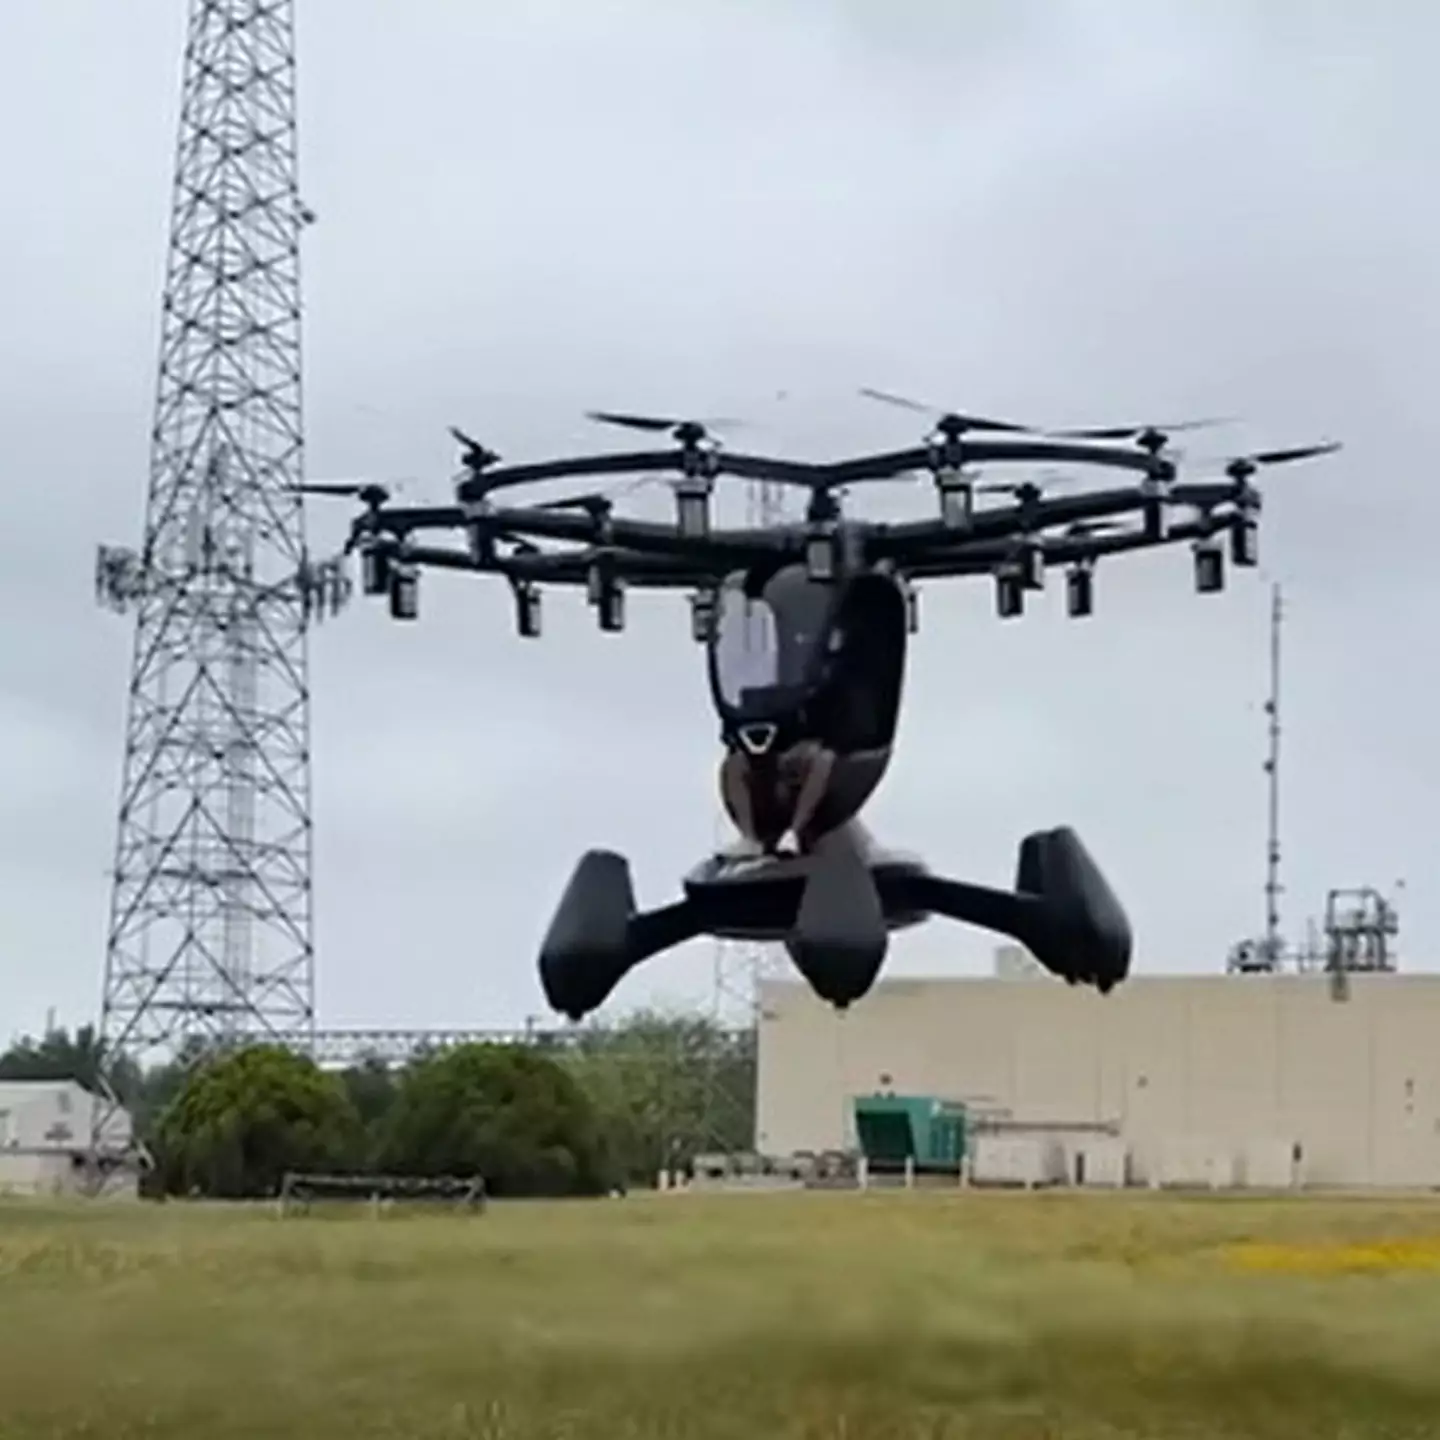 What it's like to fly an 'epic' $495,000 human drone